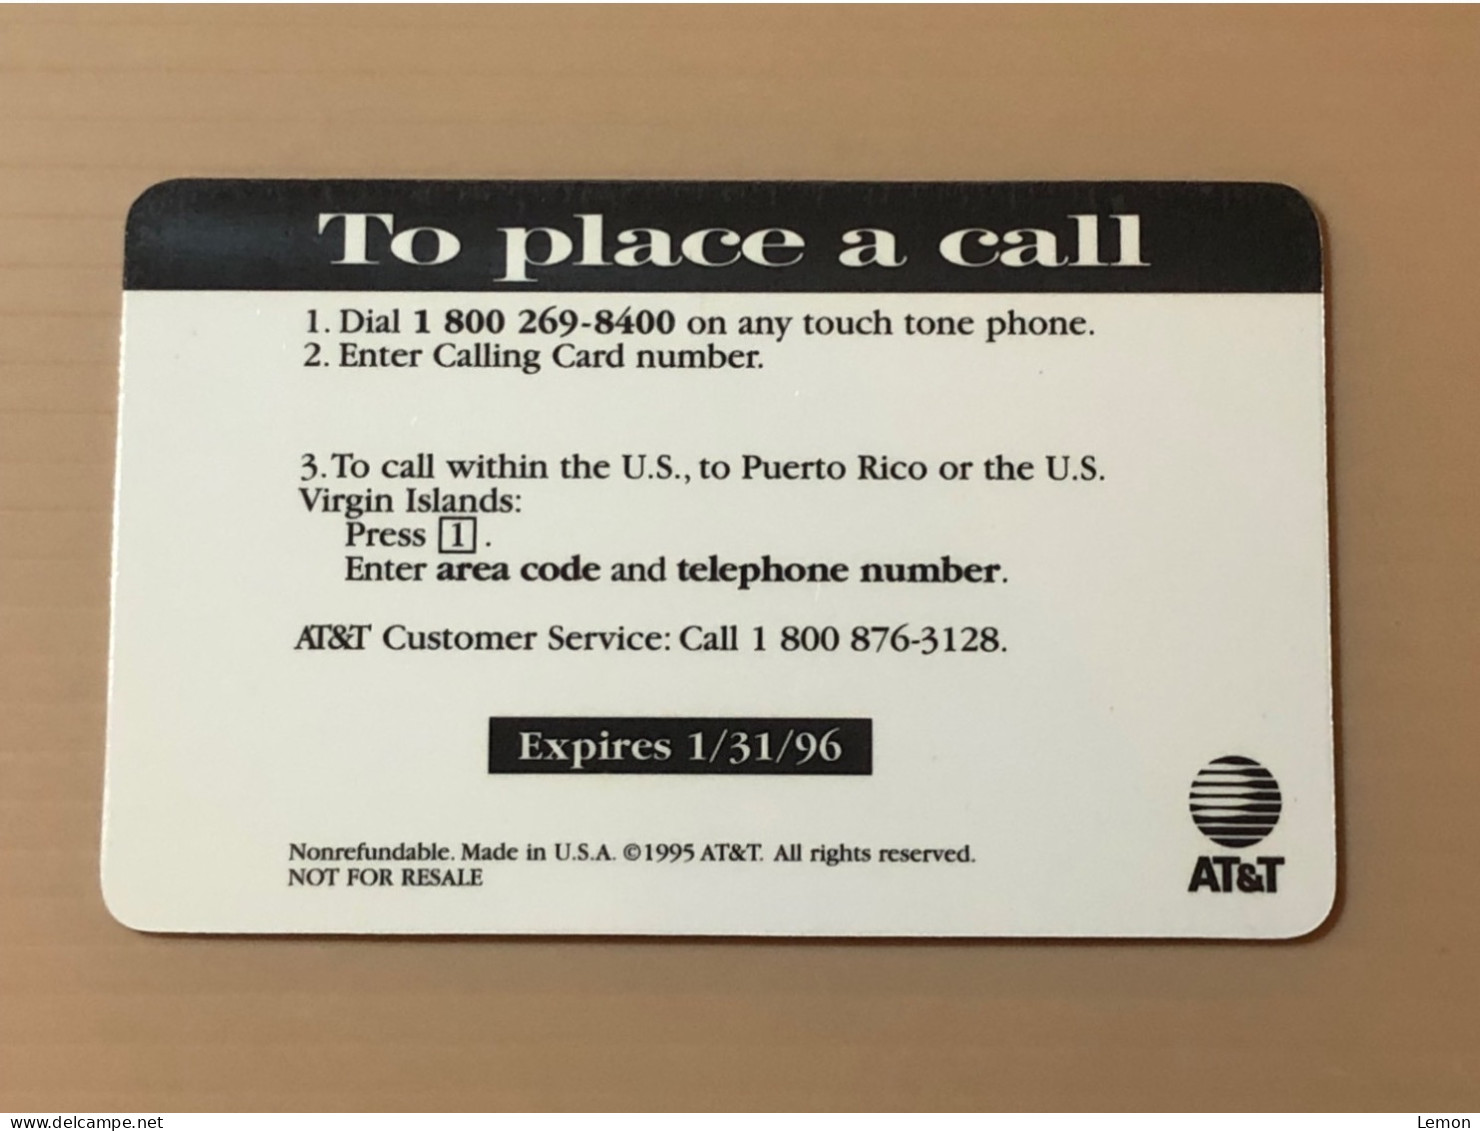 Mint USA UNITED STATES America Prepaid Telecard Phonecard, AT&T Annual Top Cops Award SAMPLE CARD, Set Of 1 Mint Card - Collections